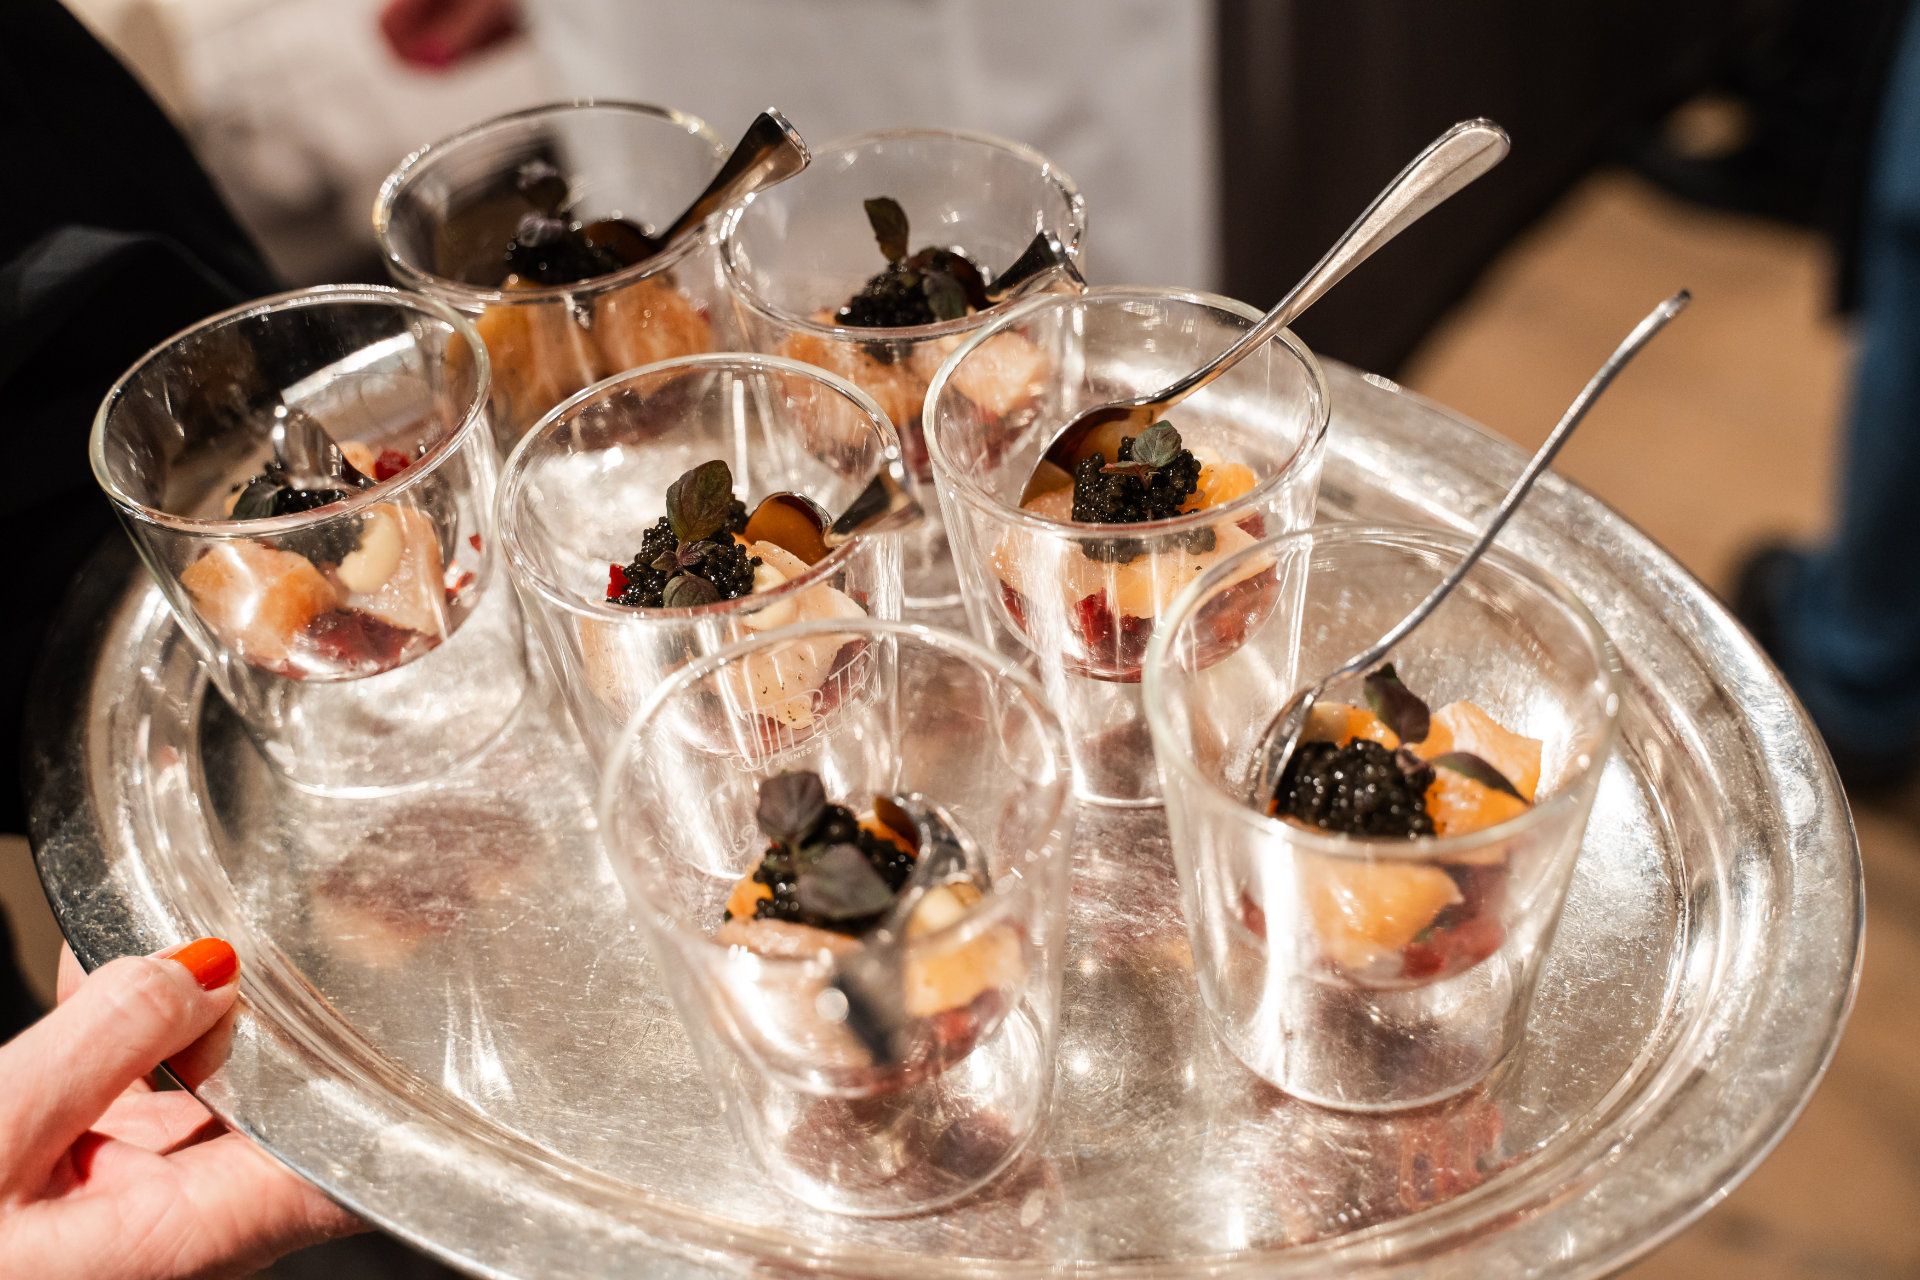 A server's hand holding a tray of elegant appetizers in clear glasses garnished with black toppings, ready to be enjoyed at a sophisticated event captured by an Aschaffenburg photographer.